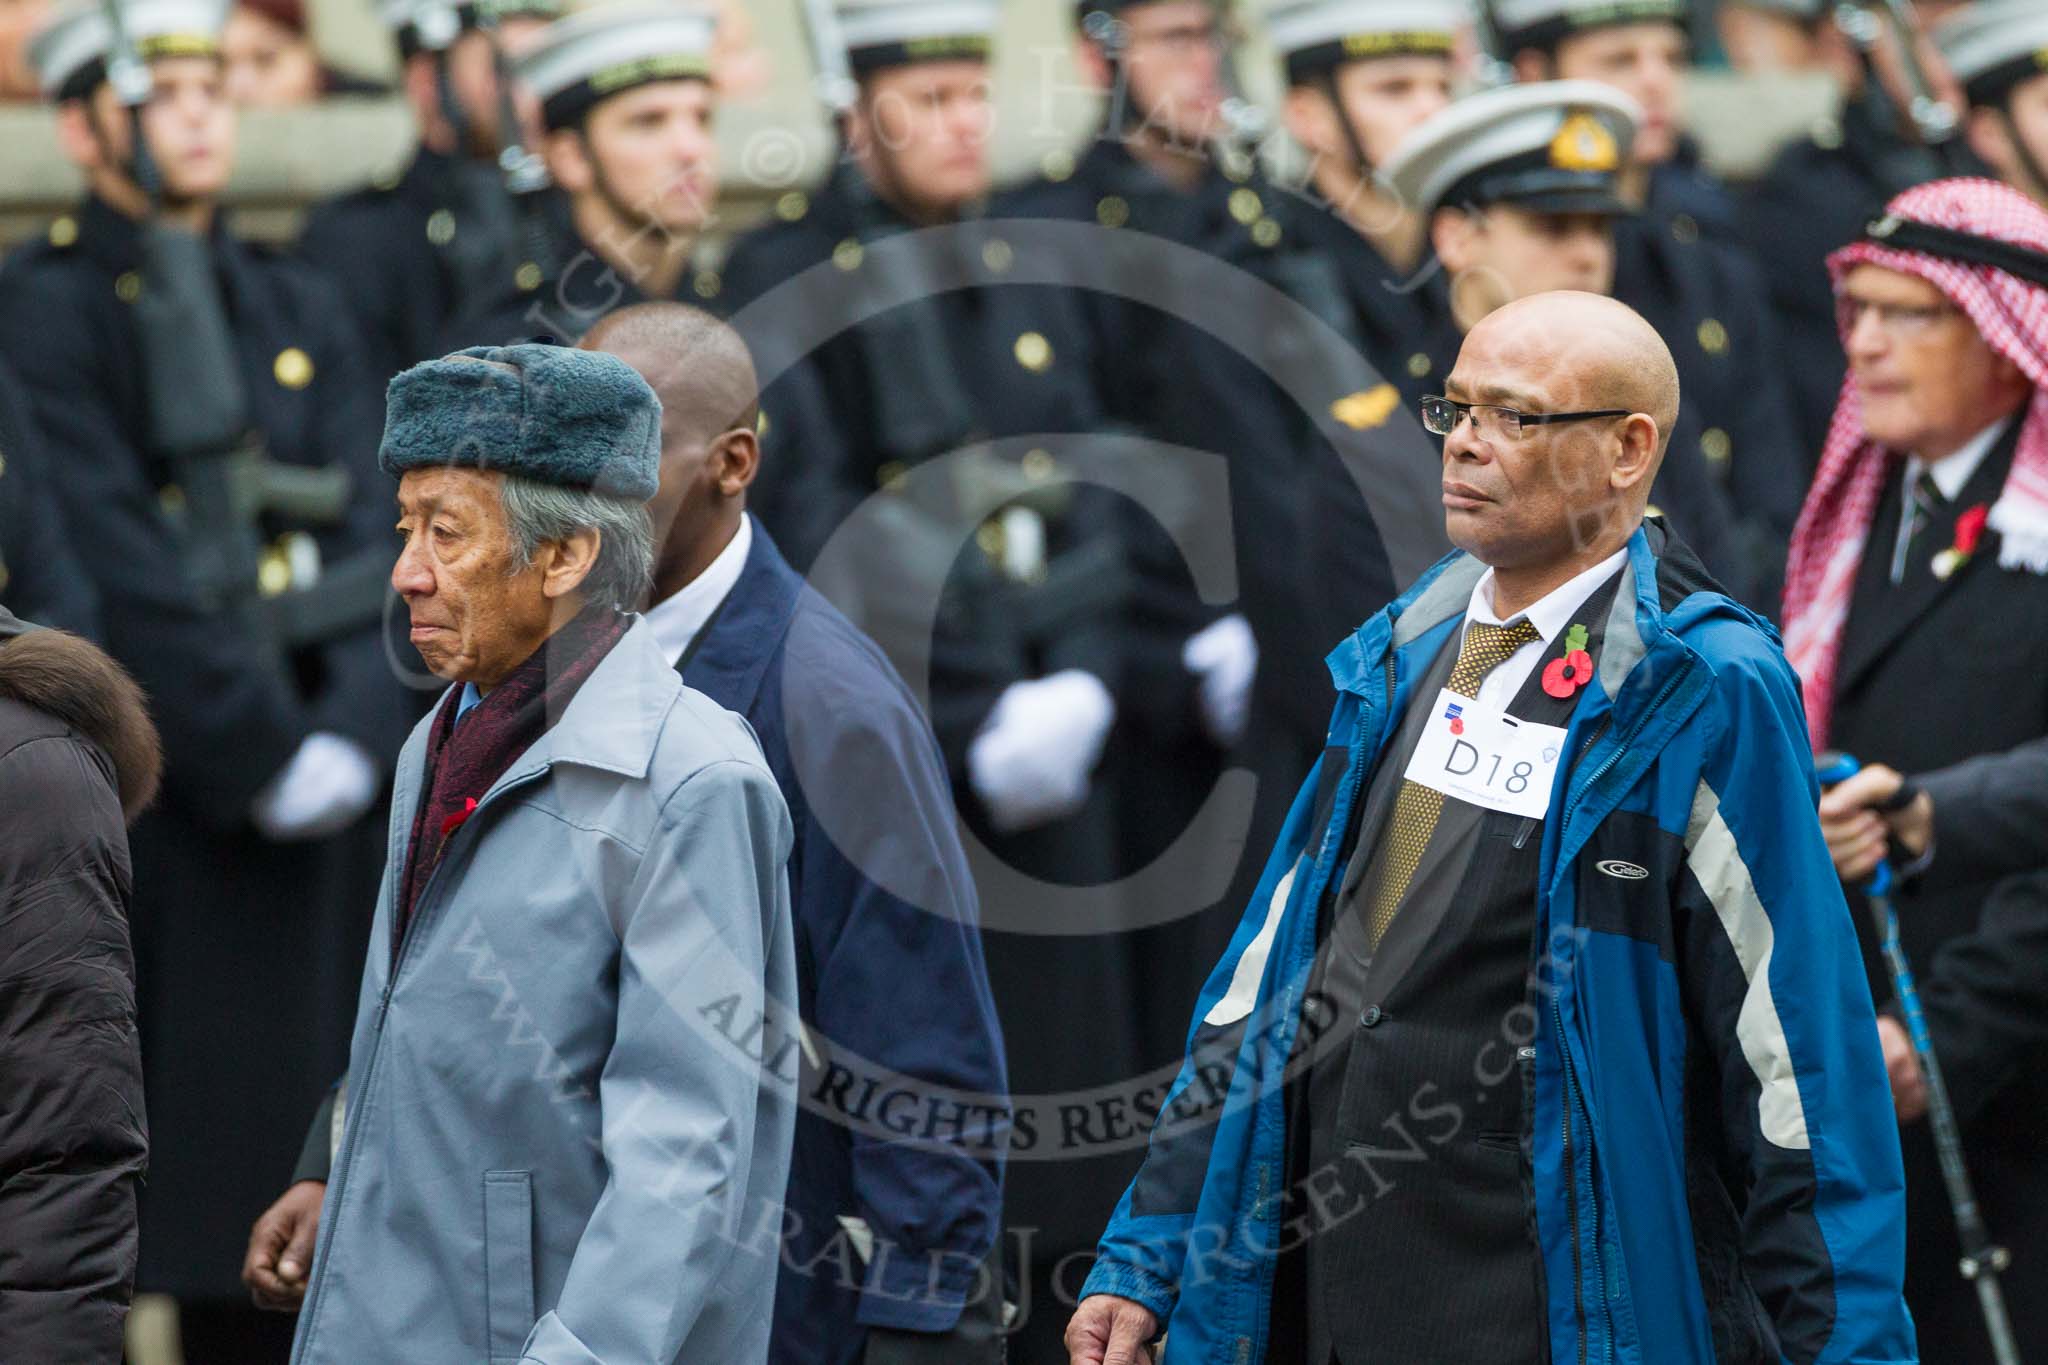 Remembrance Sunday at the Cenotaph 2015: Group D18, West Indian Association of Service Personnel.
Cenotaph, Whitehall, London SW1,
London,
Greater London,
United Kingdom,
on 08 November 2015 at 11:55, image #702